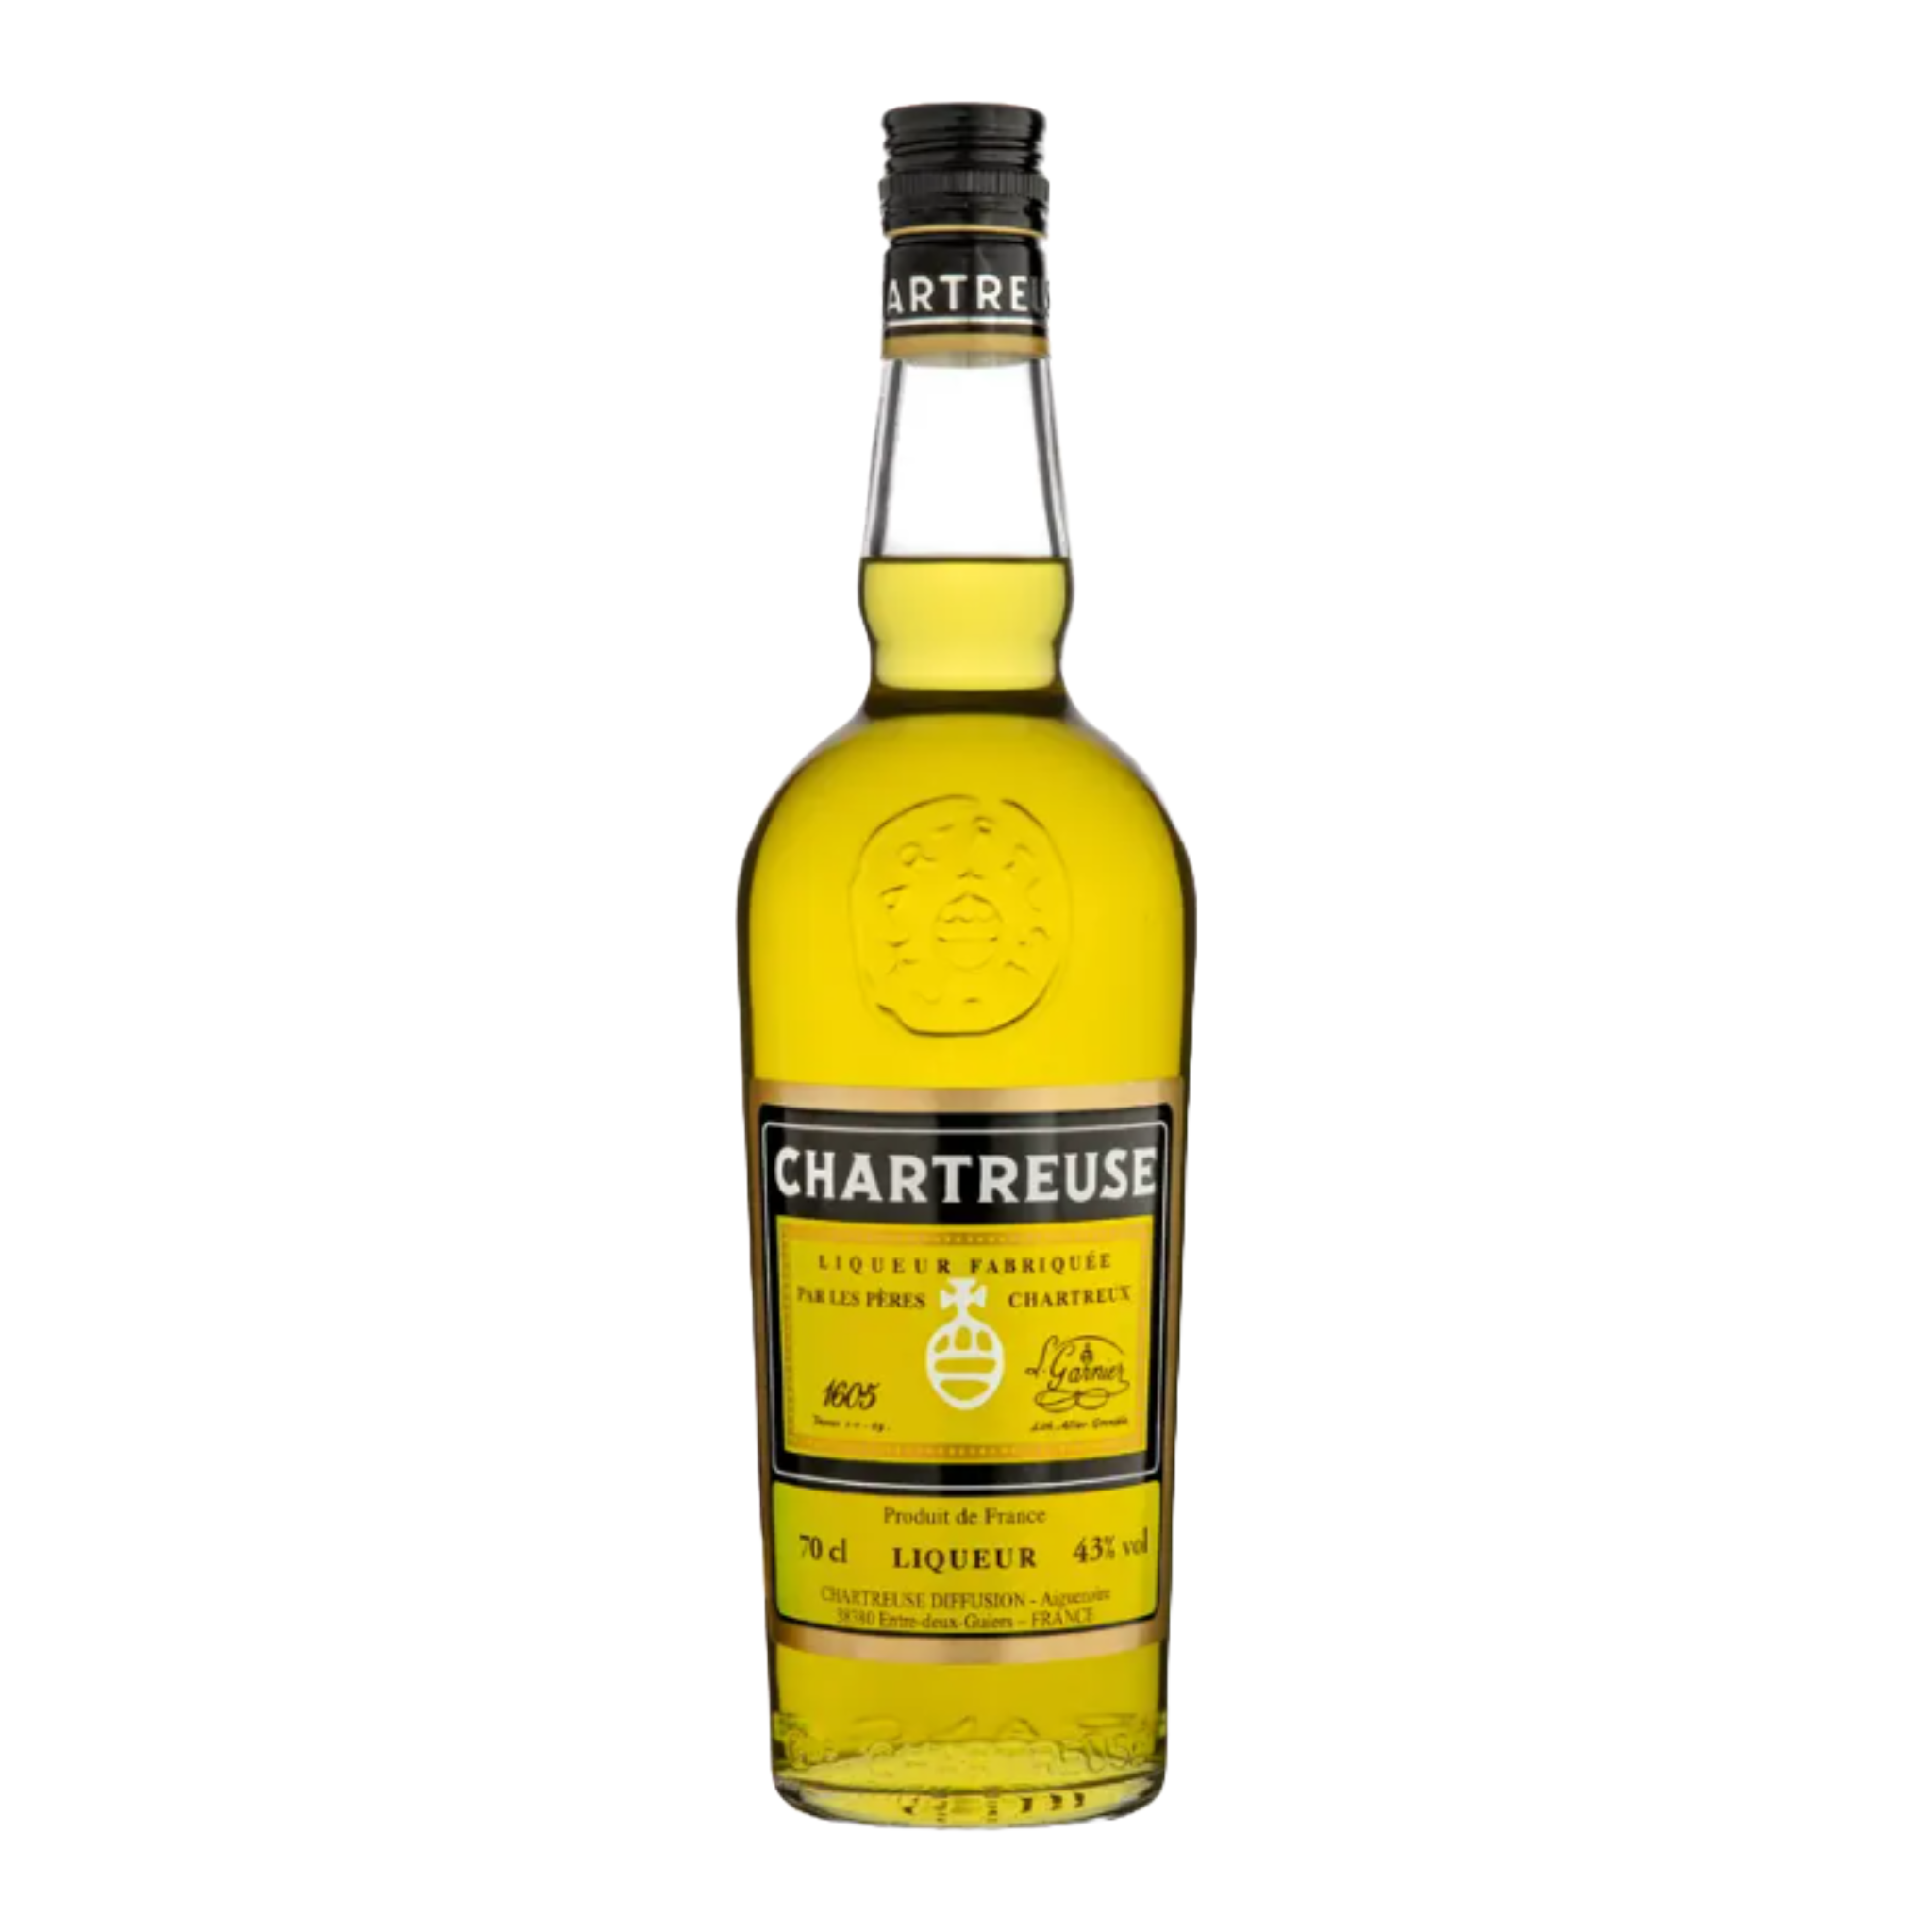 CHARTREUSE 'Yellow' Herb Liqueur from France Bottle (70cl) 43%abv Image